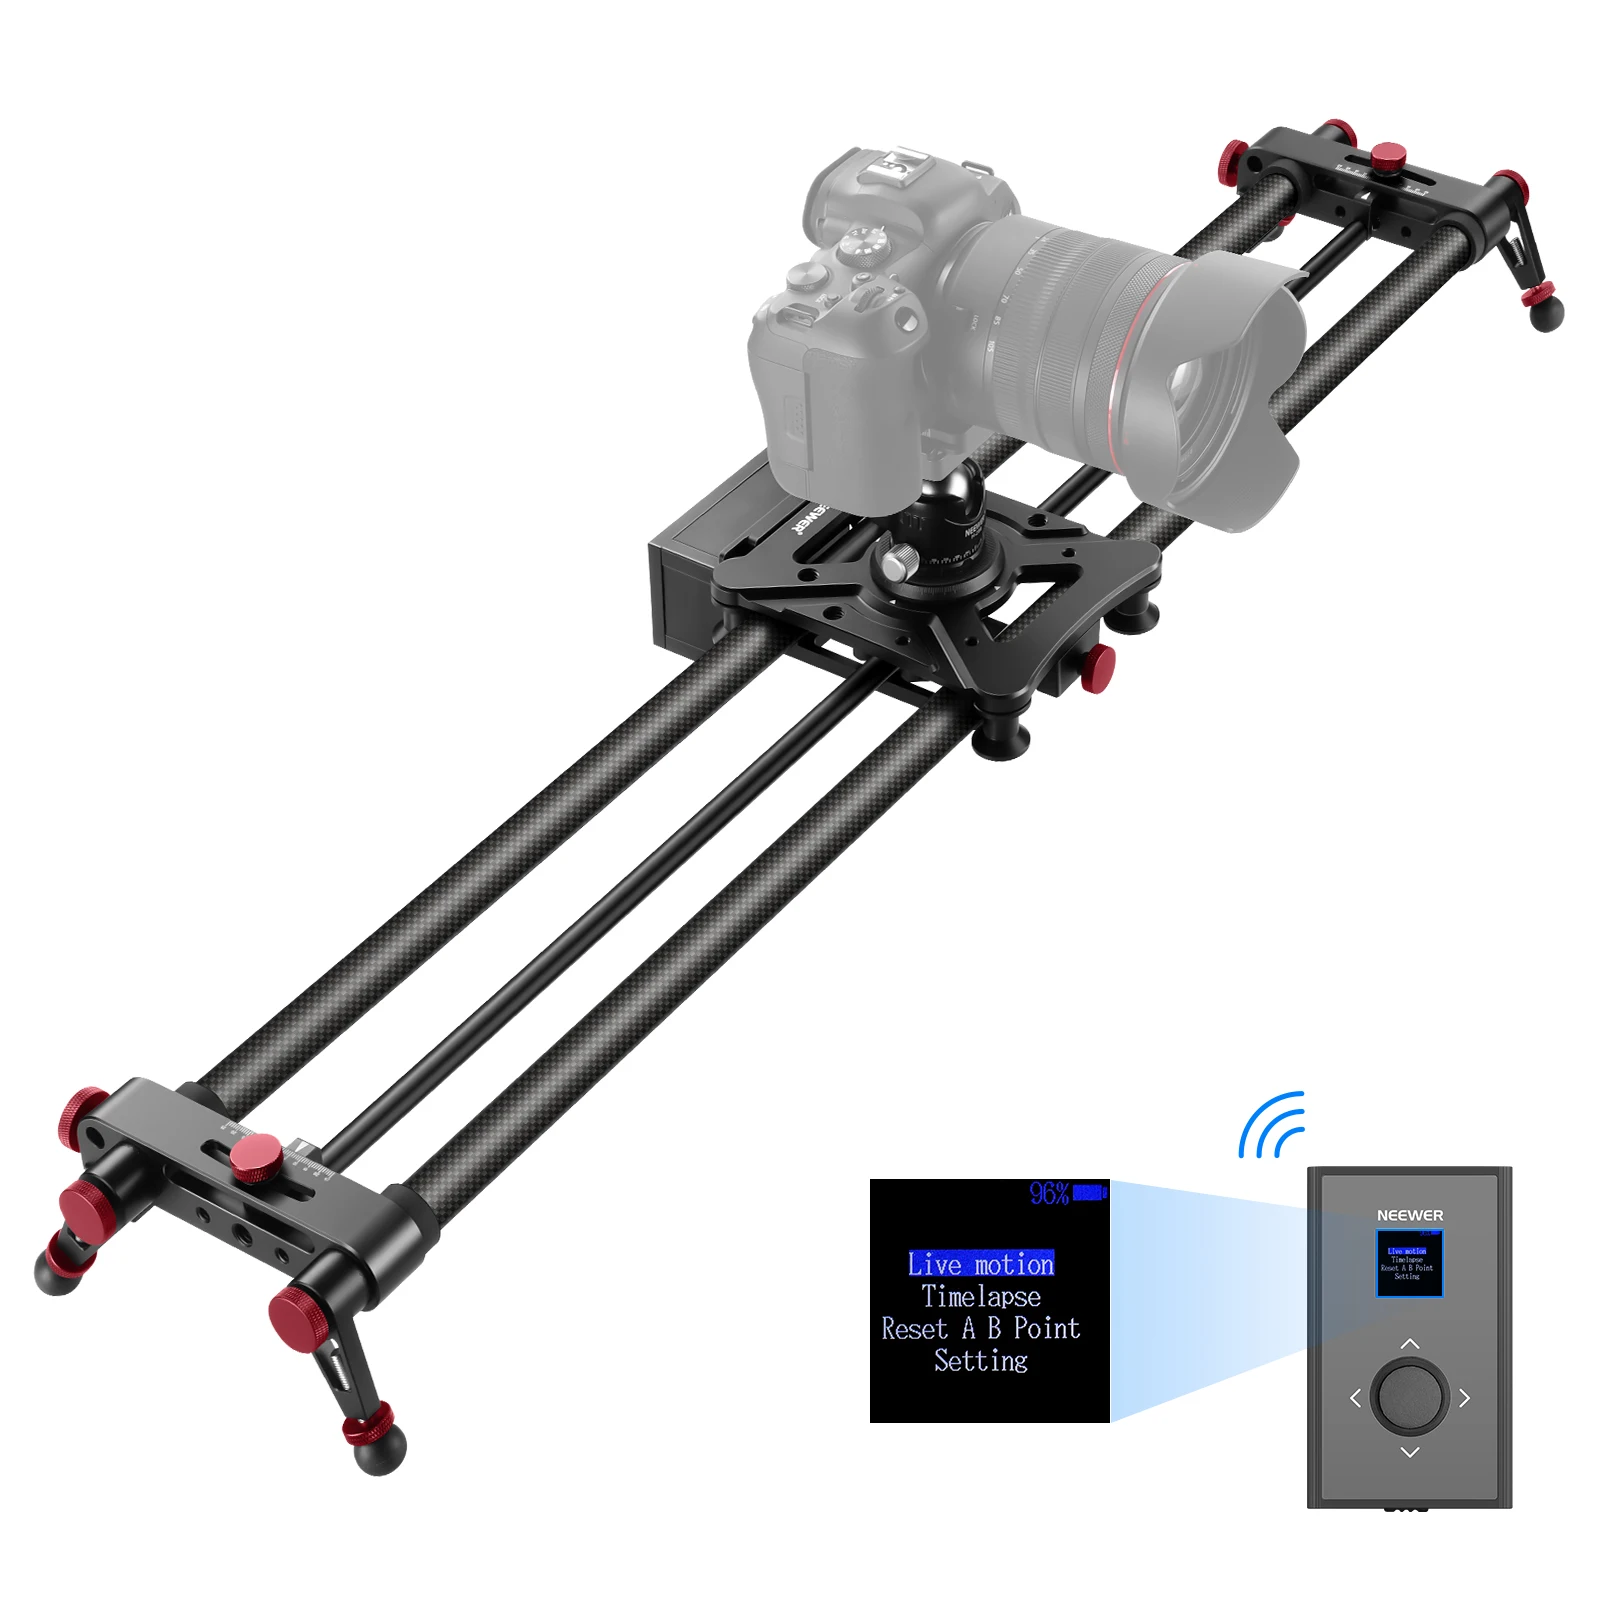 19.7 inches/ 50 Centimeters with 4 Bearings for Smartphone Nikon Canon Sony Camera Neewer Camera Slider Aluminum Alloy Dolly Rail Load up to 12 pounds/5.44 kilograms 